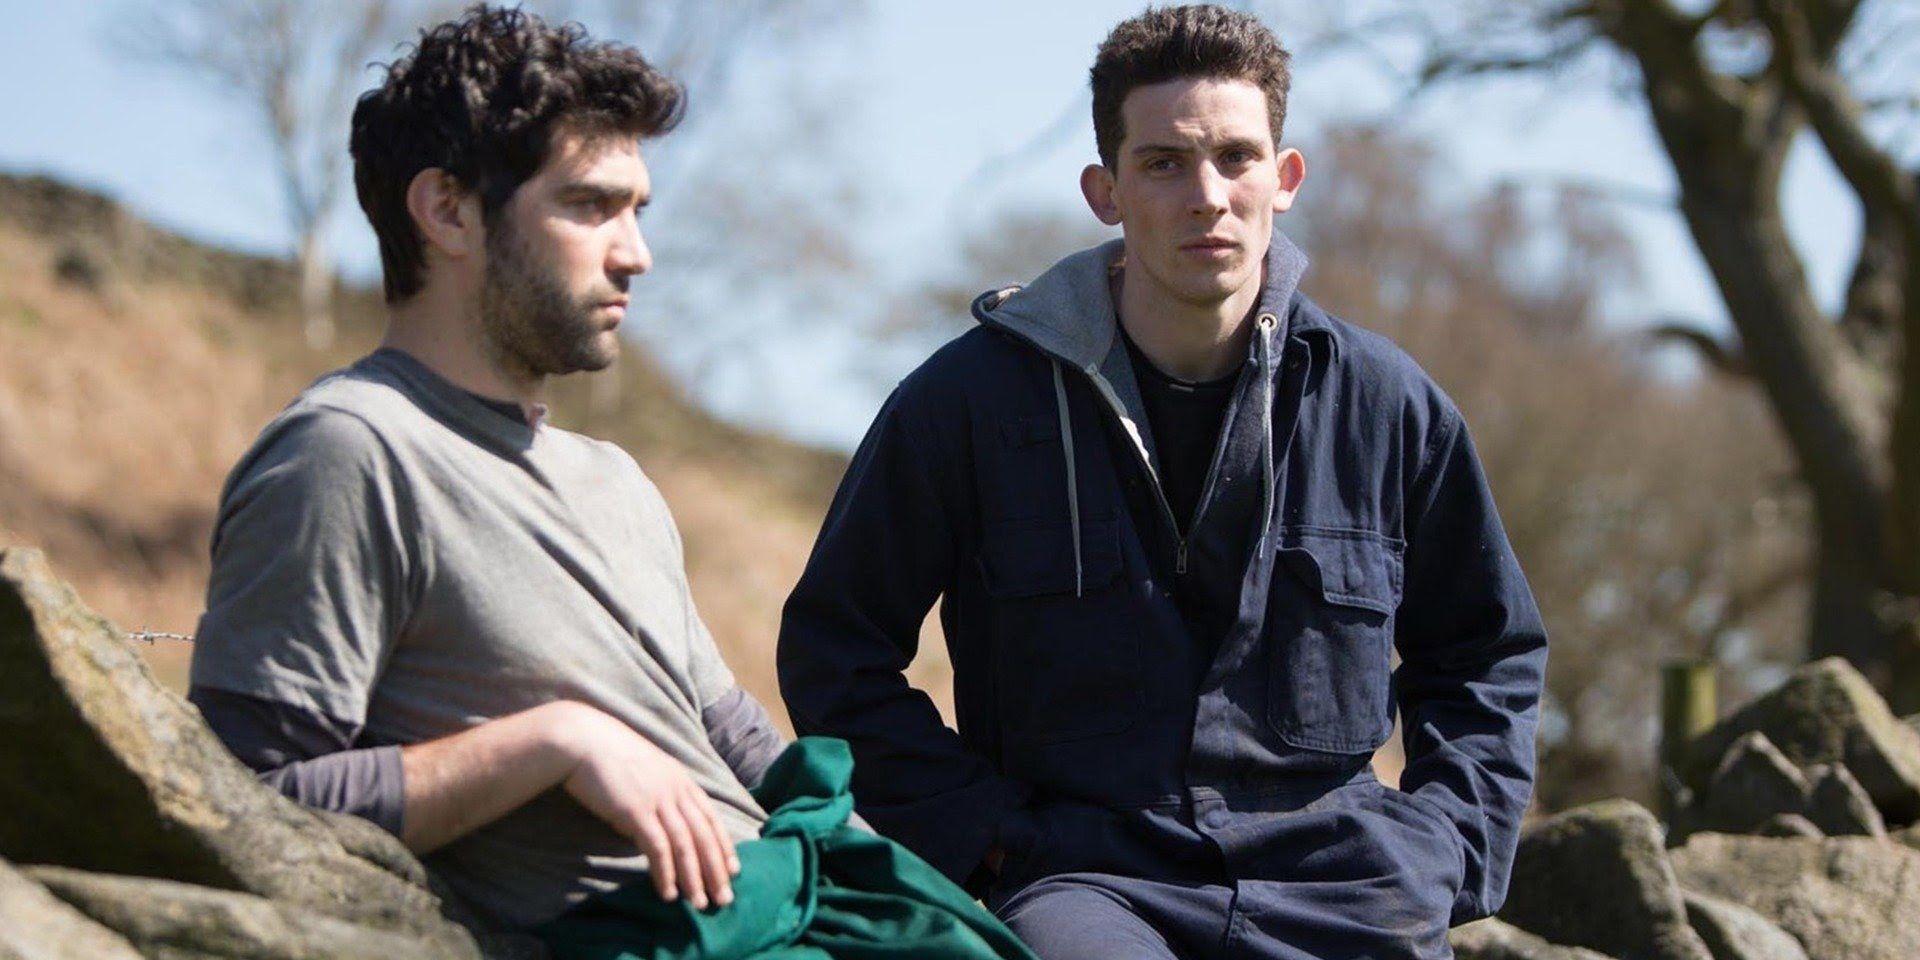 A still from the film God's Own Country featuring Josh O'Conner and Alec Secăreanu